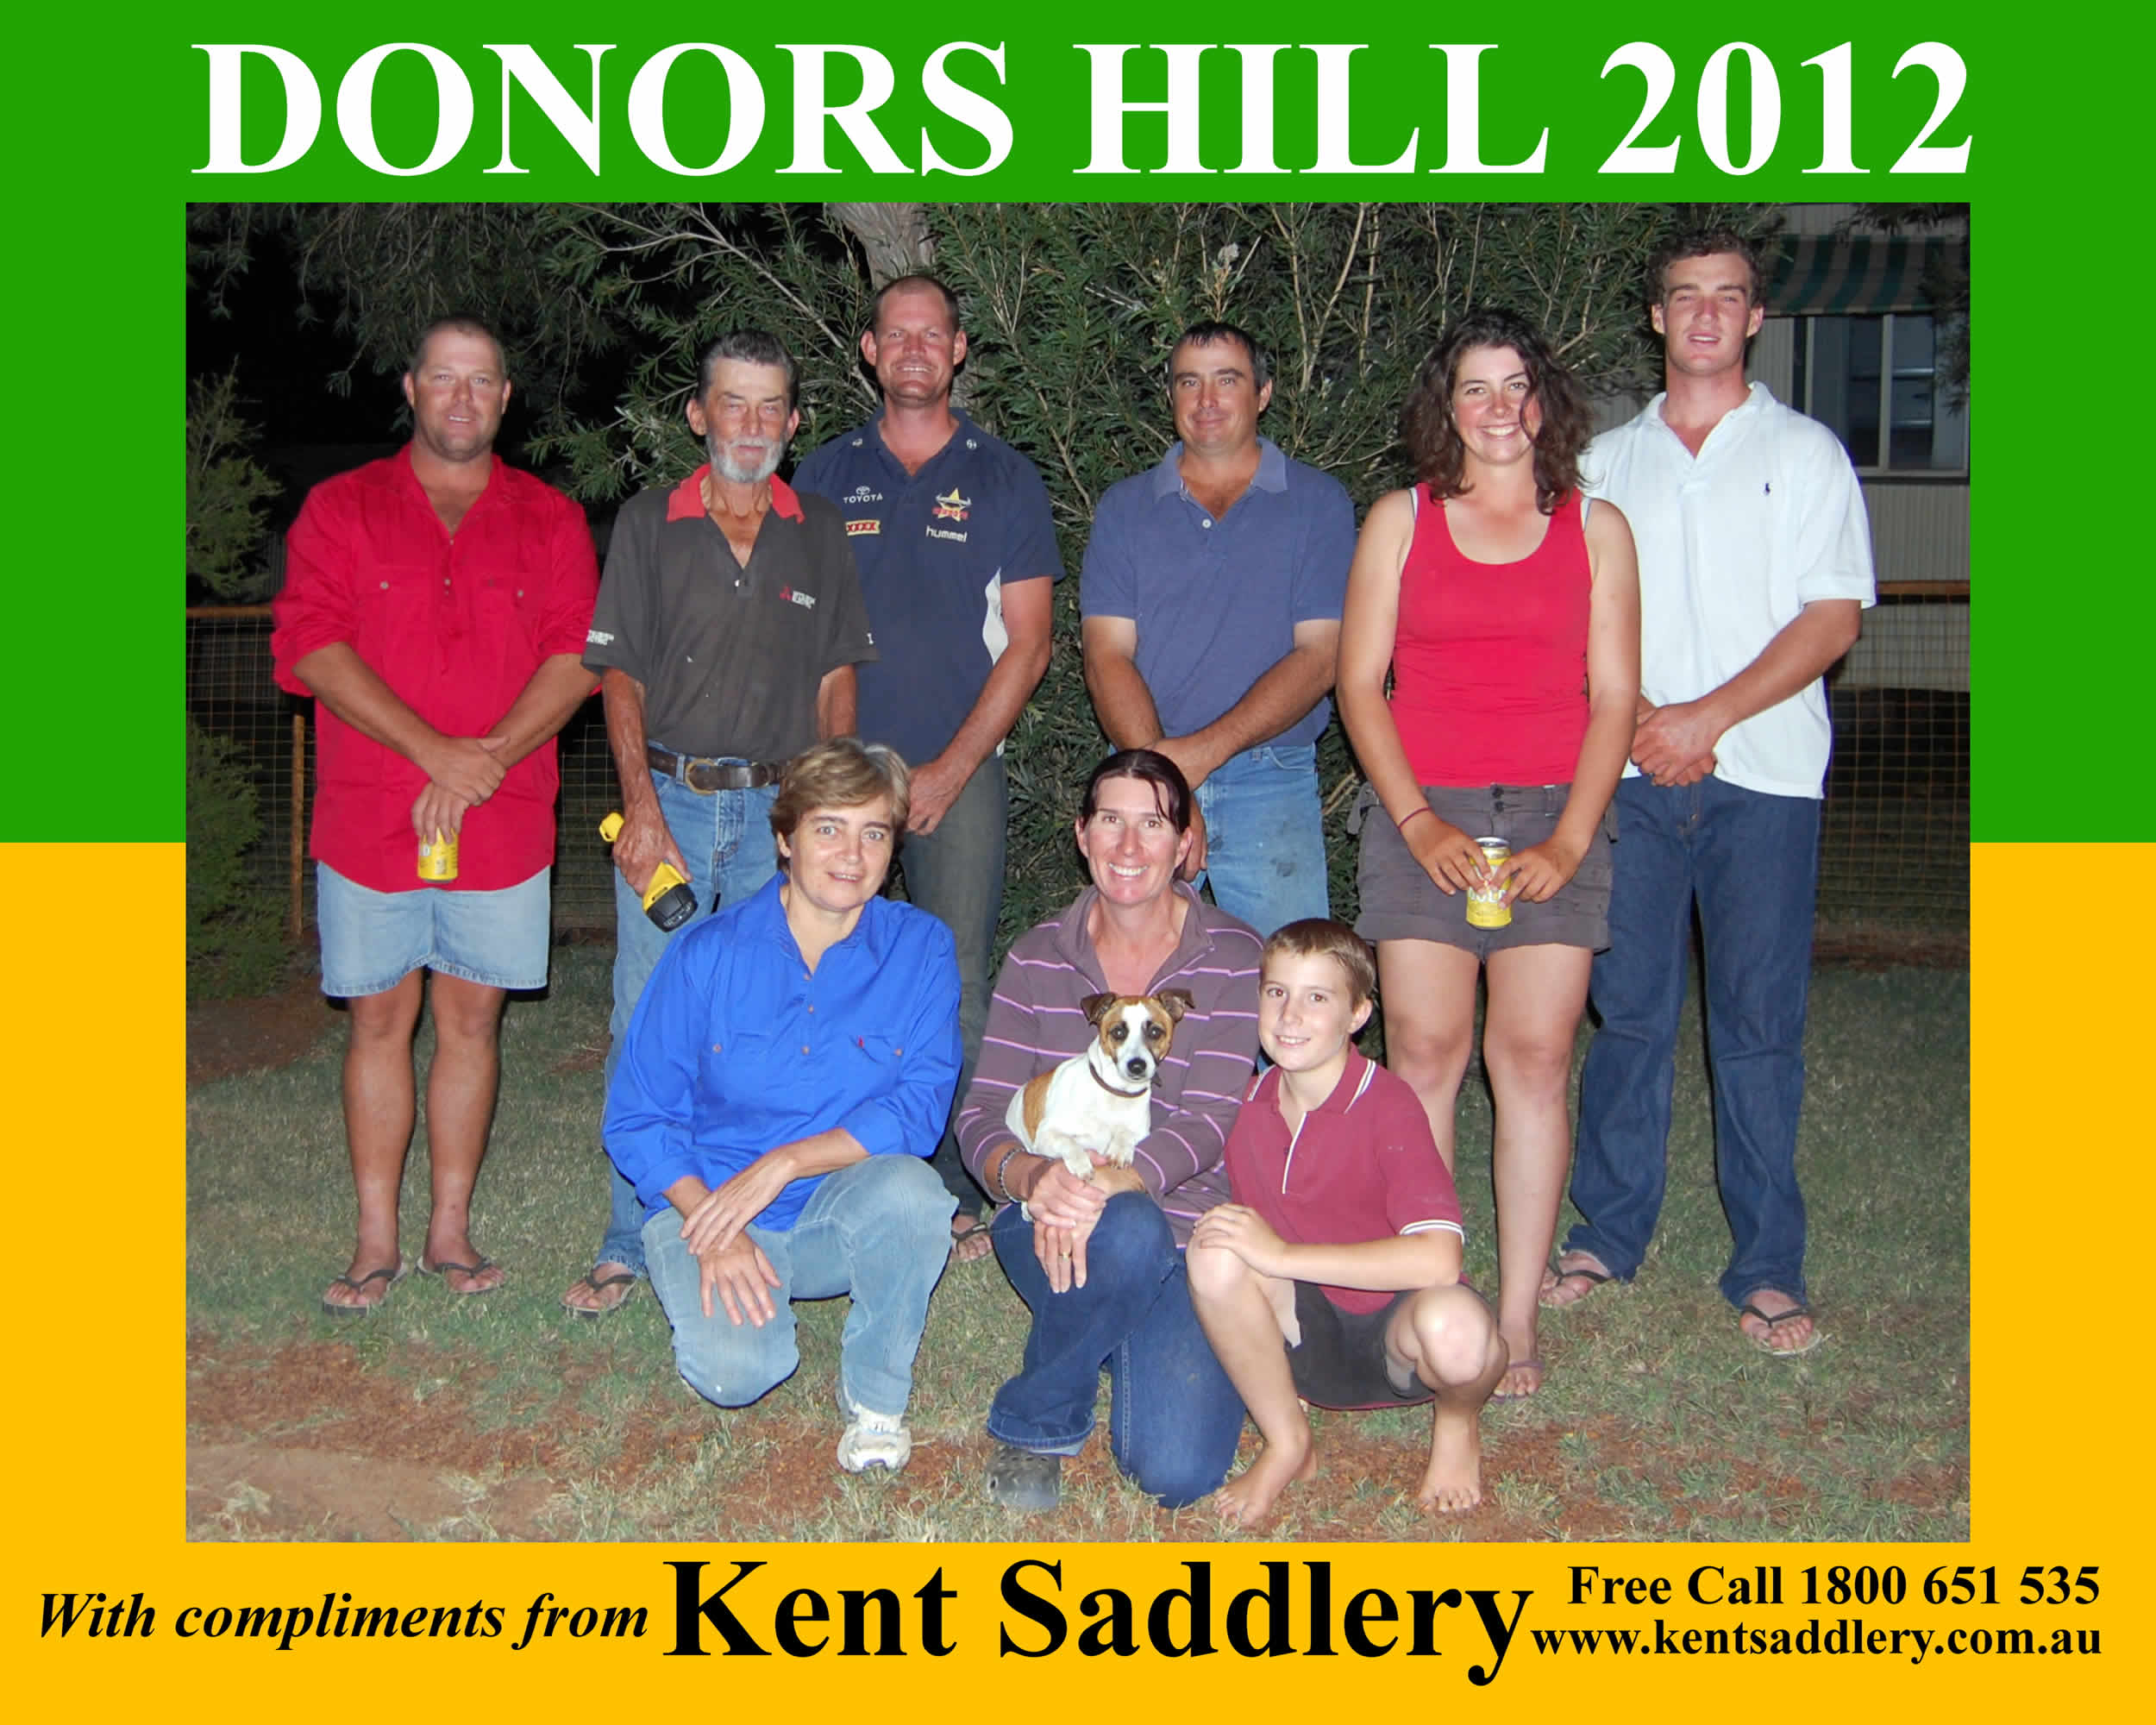 Queensland - Donors Hill 11